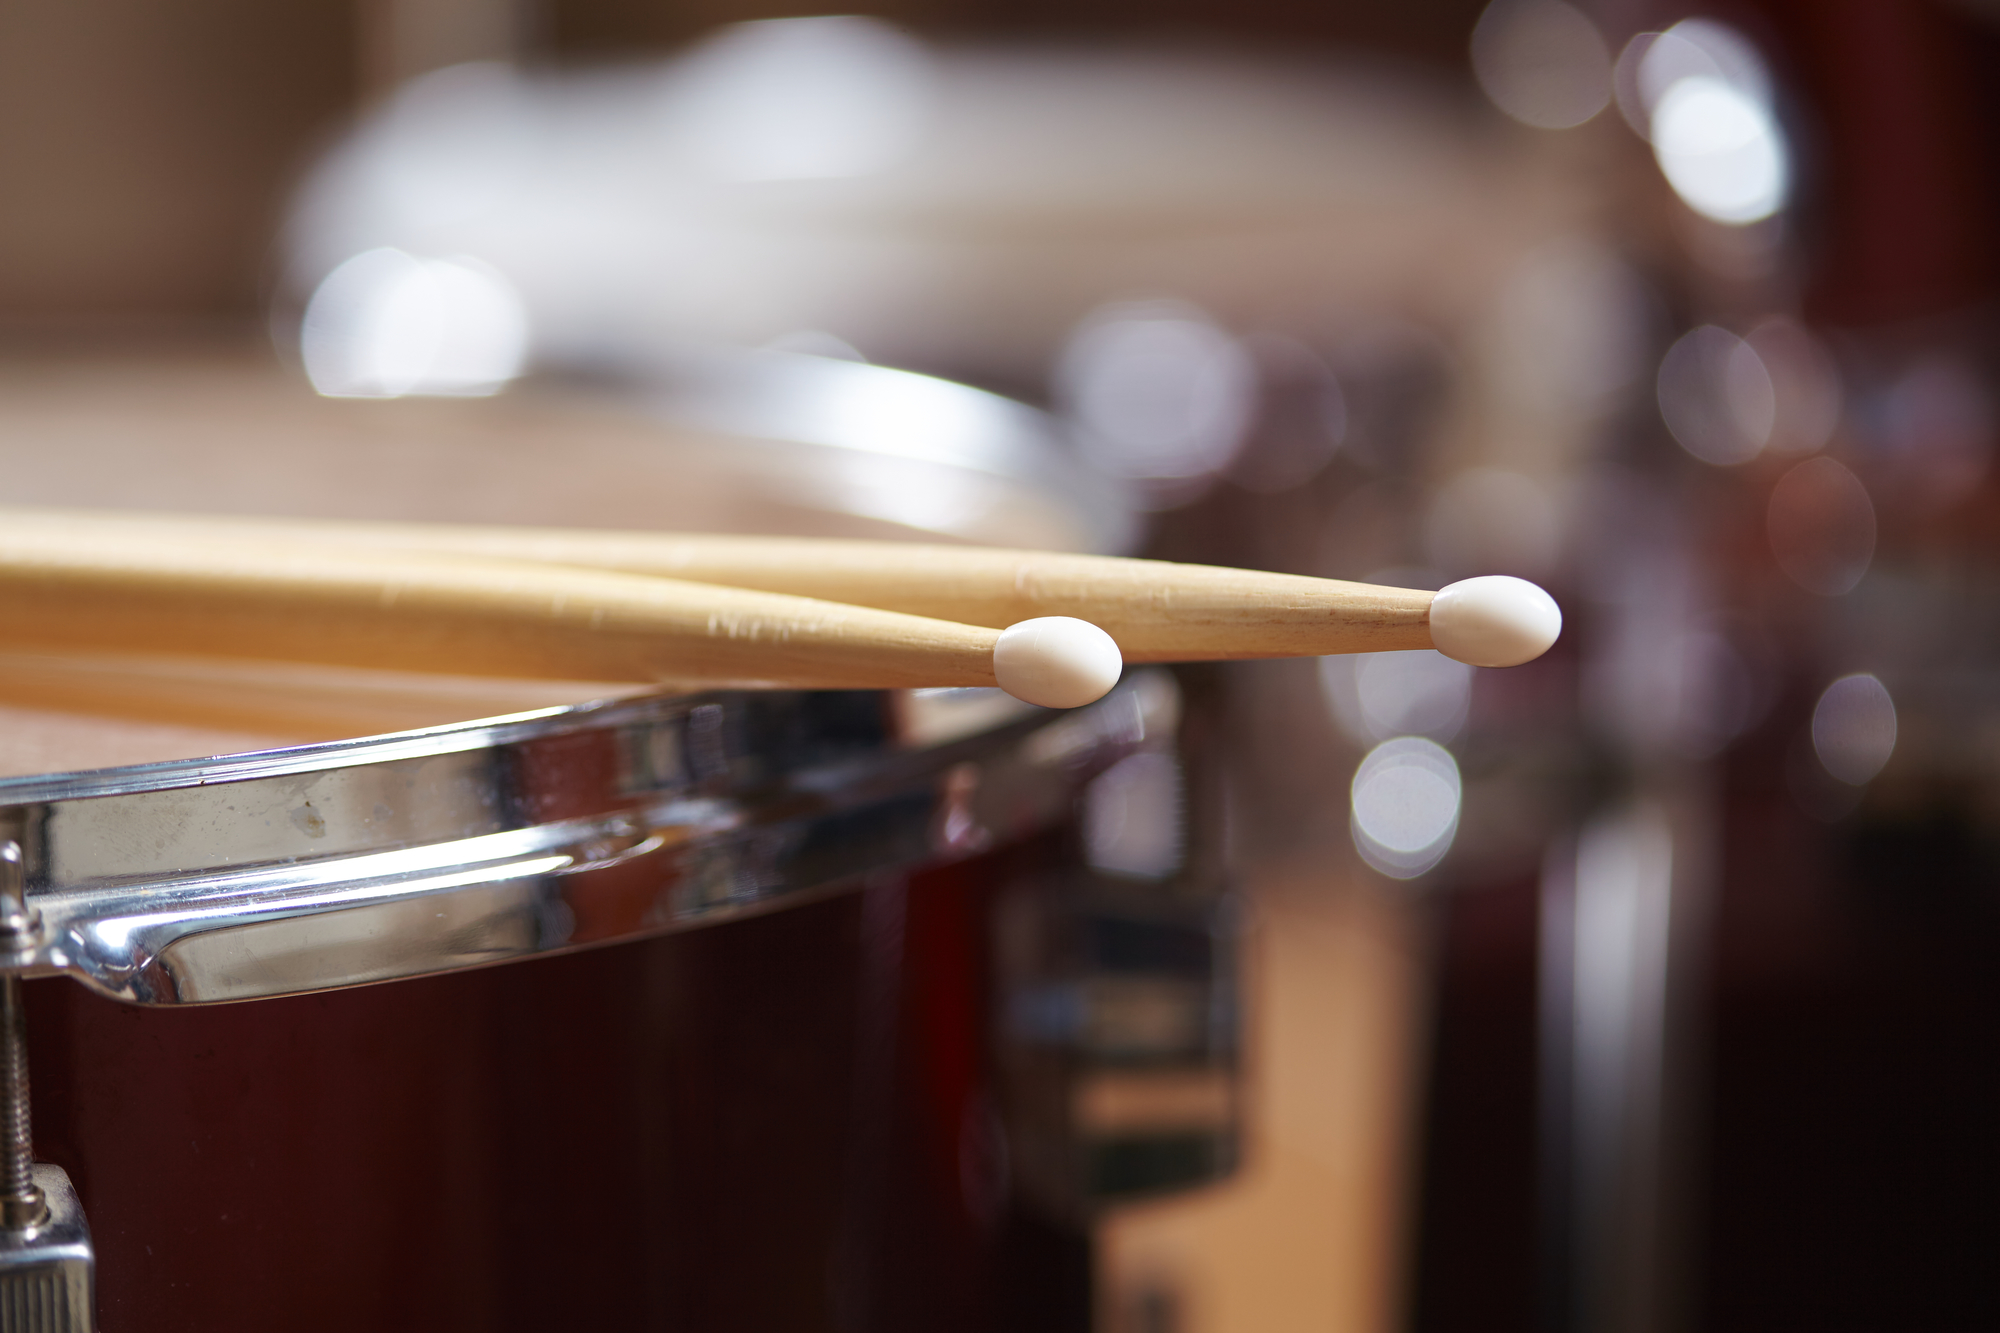 Drums conceptual image with close up of drum rim and drum sticks